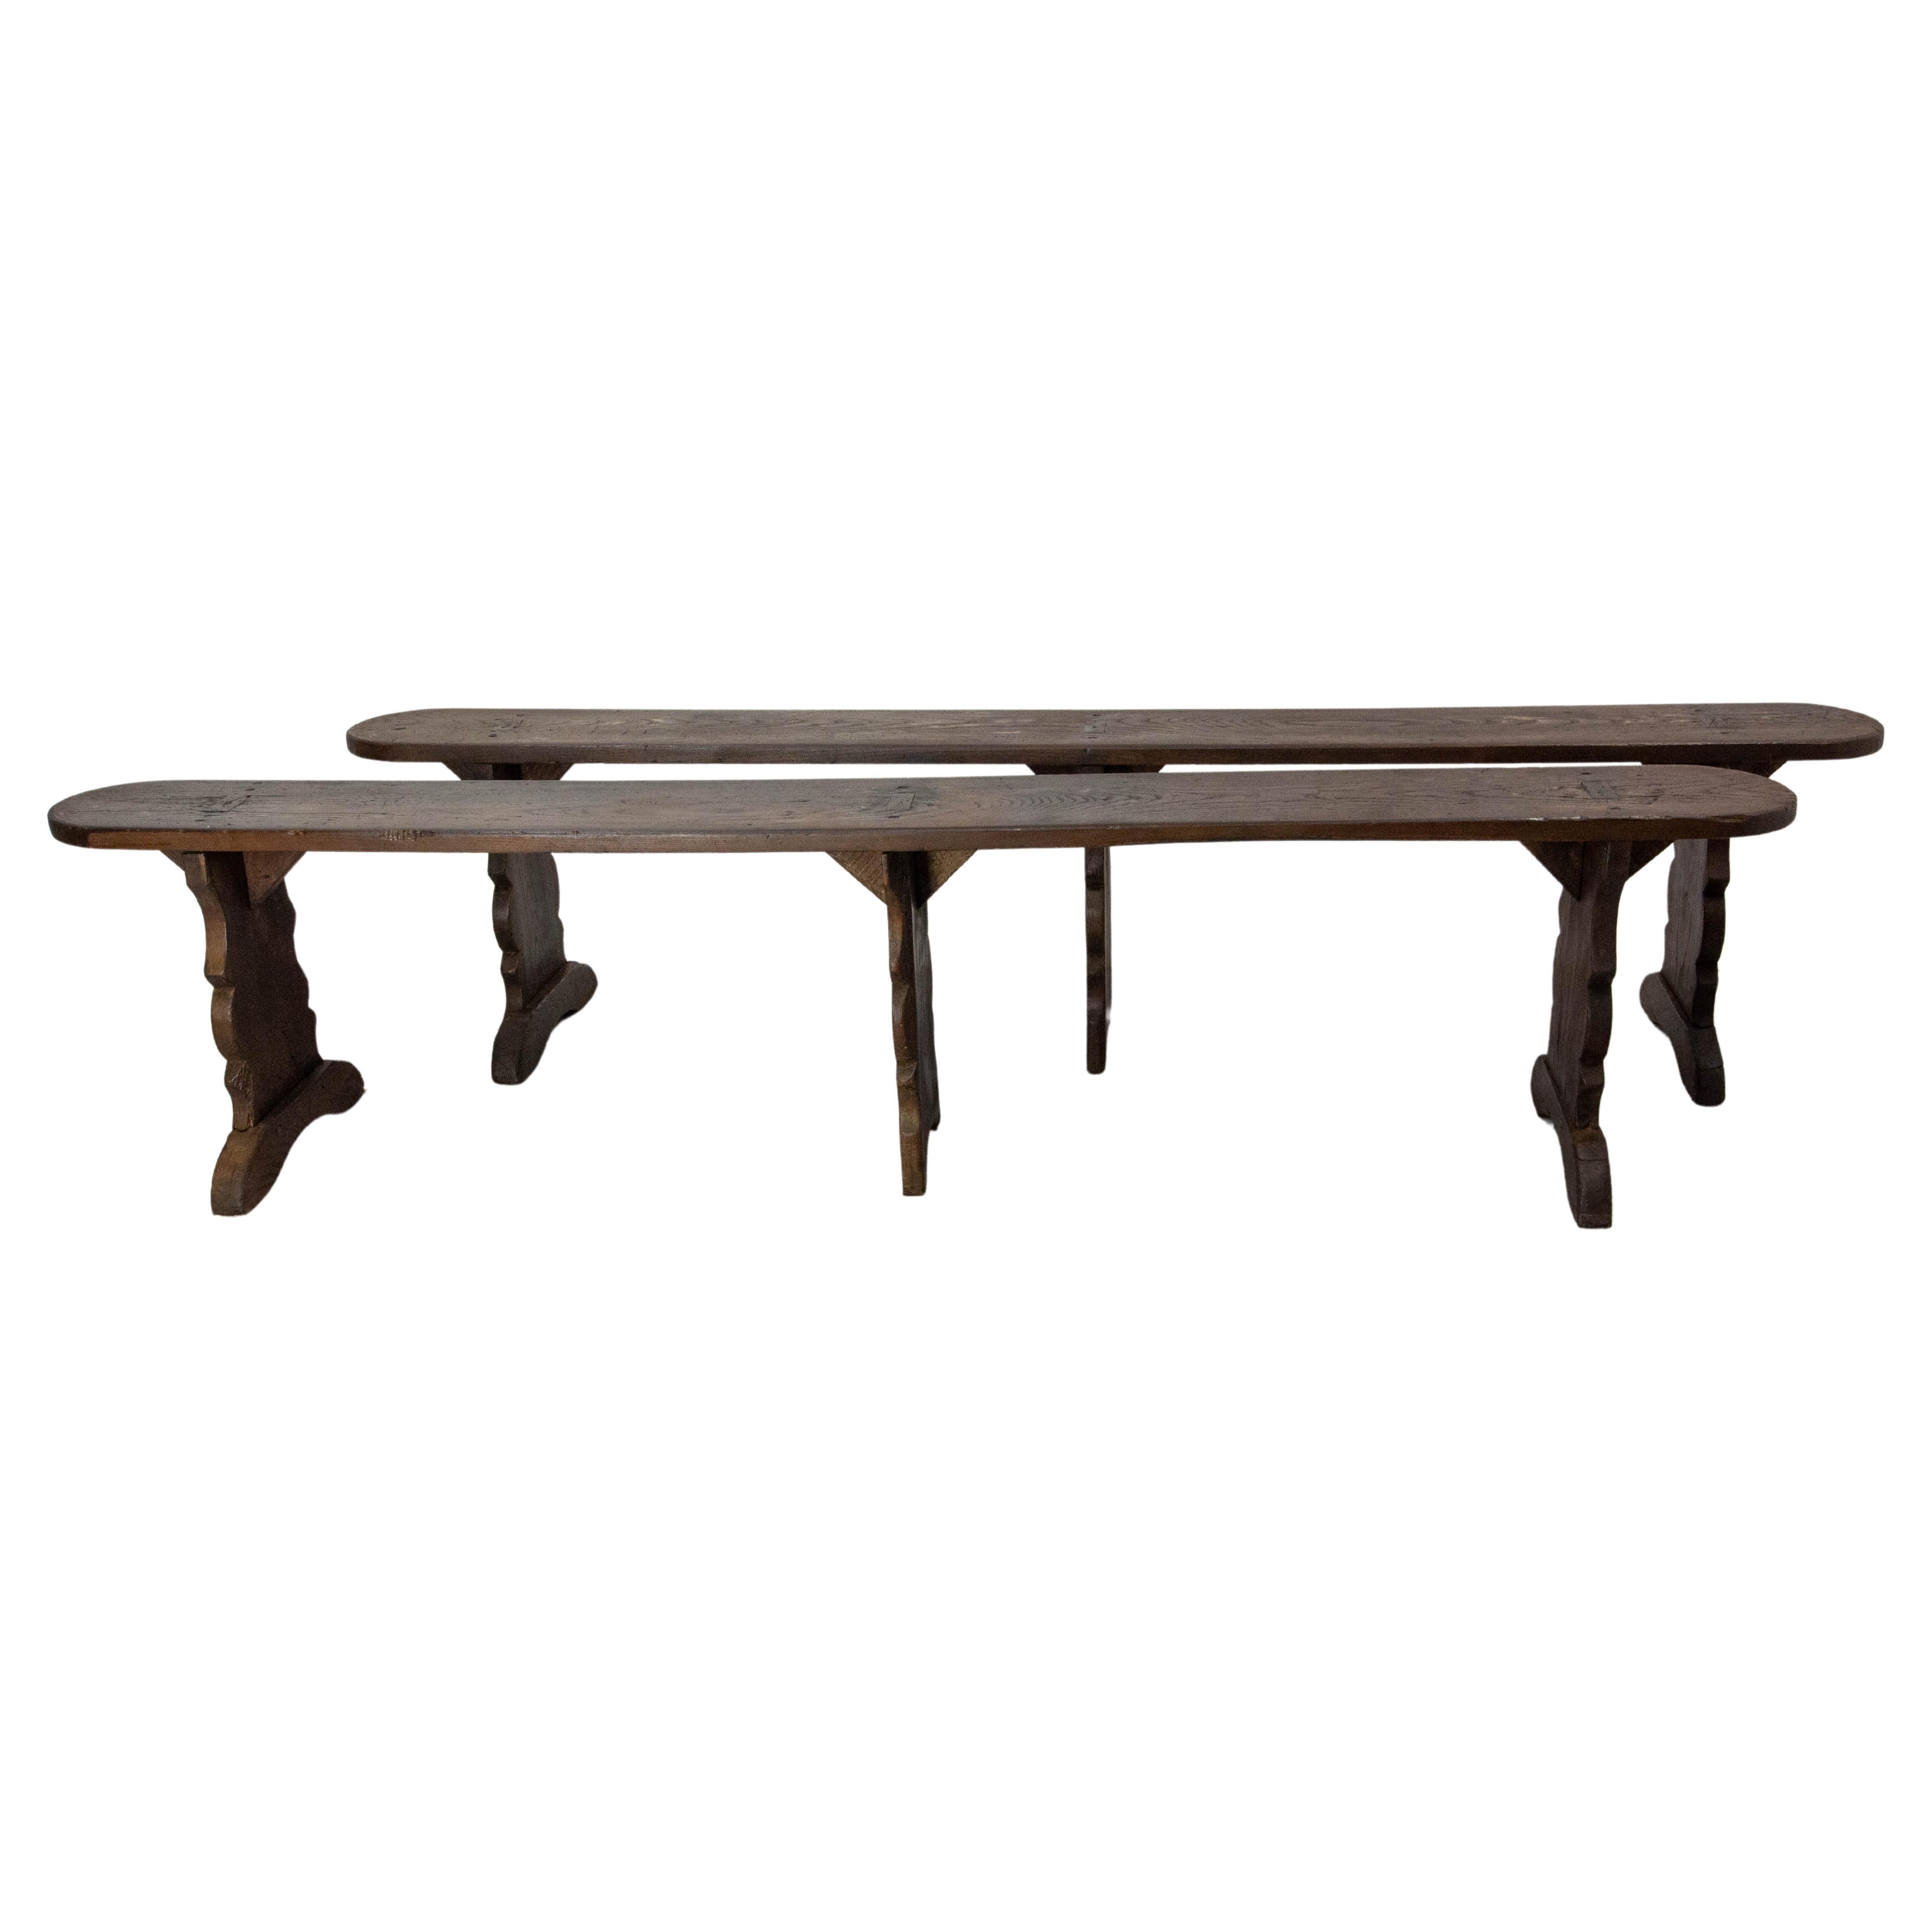 Pair of French Antique Benches Massive Chestnut, circa 1900